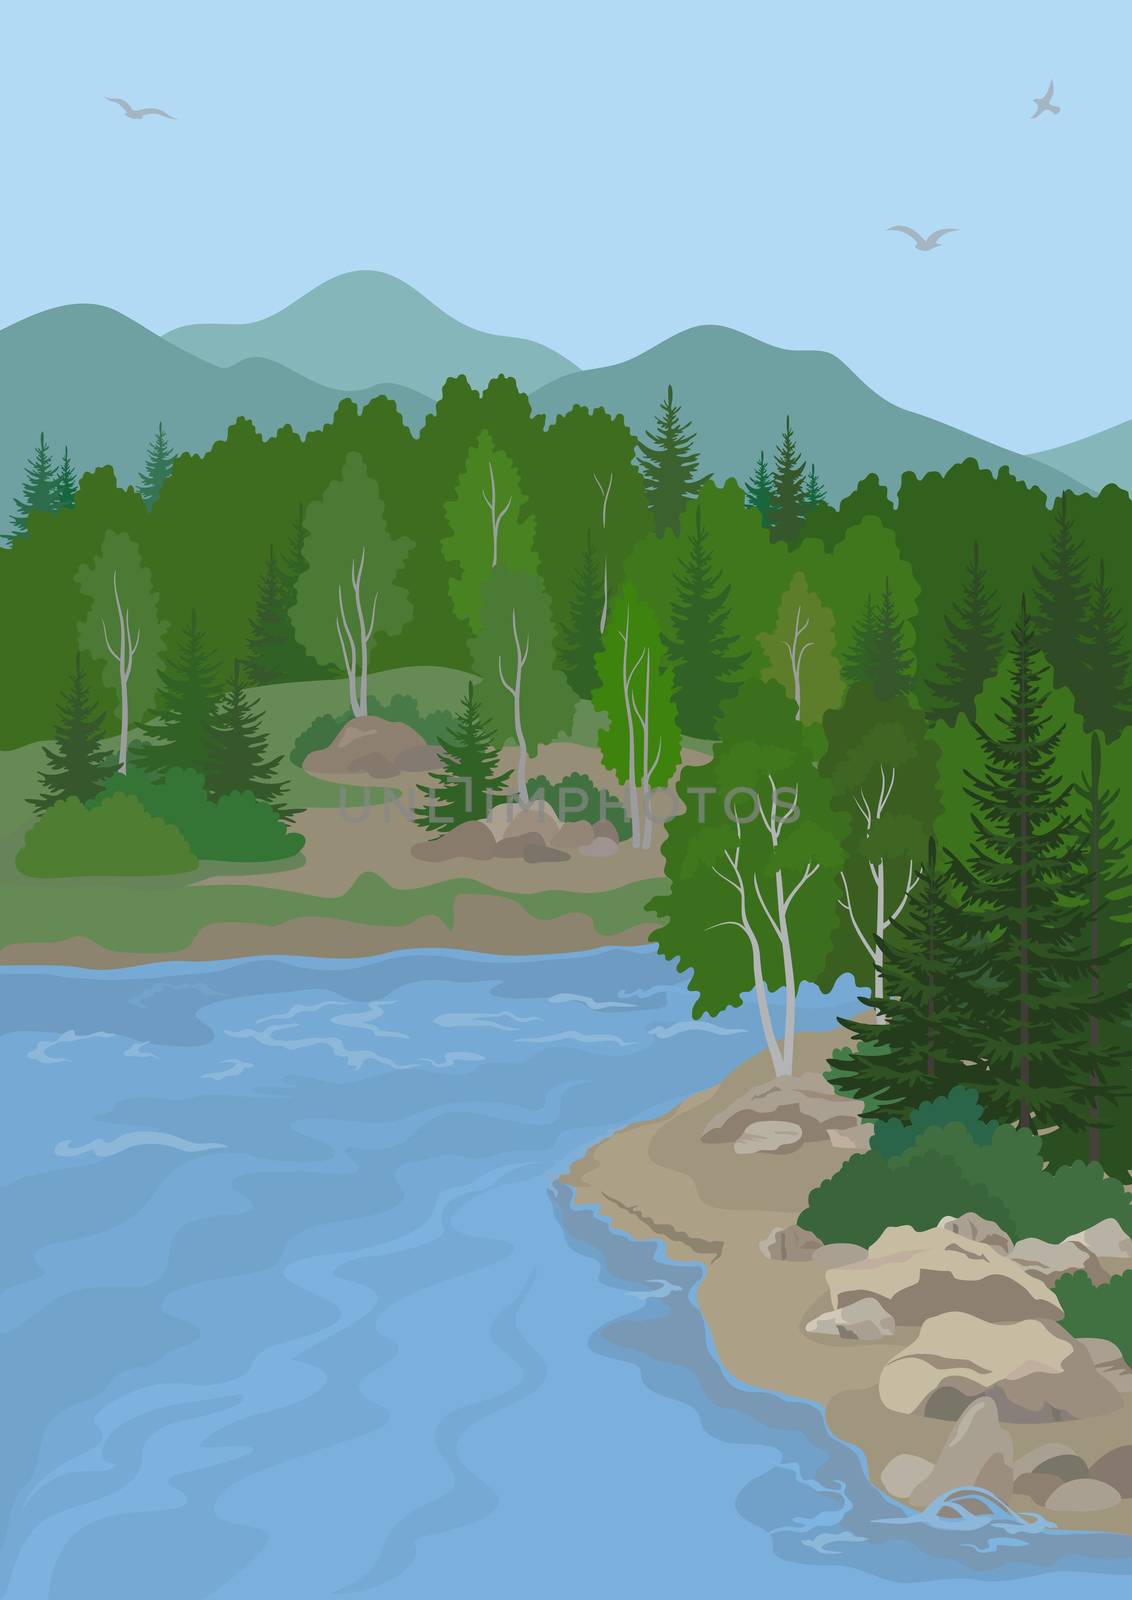 Landscape with Trees and Mountain Lake by alexcoolok